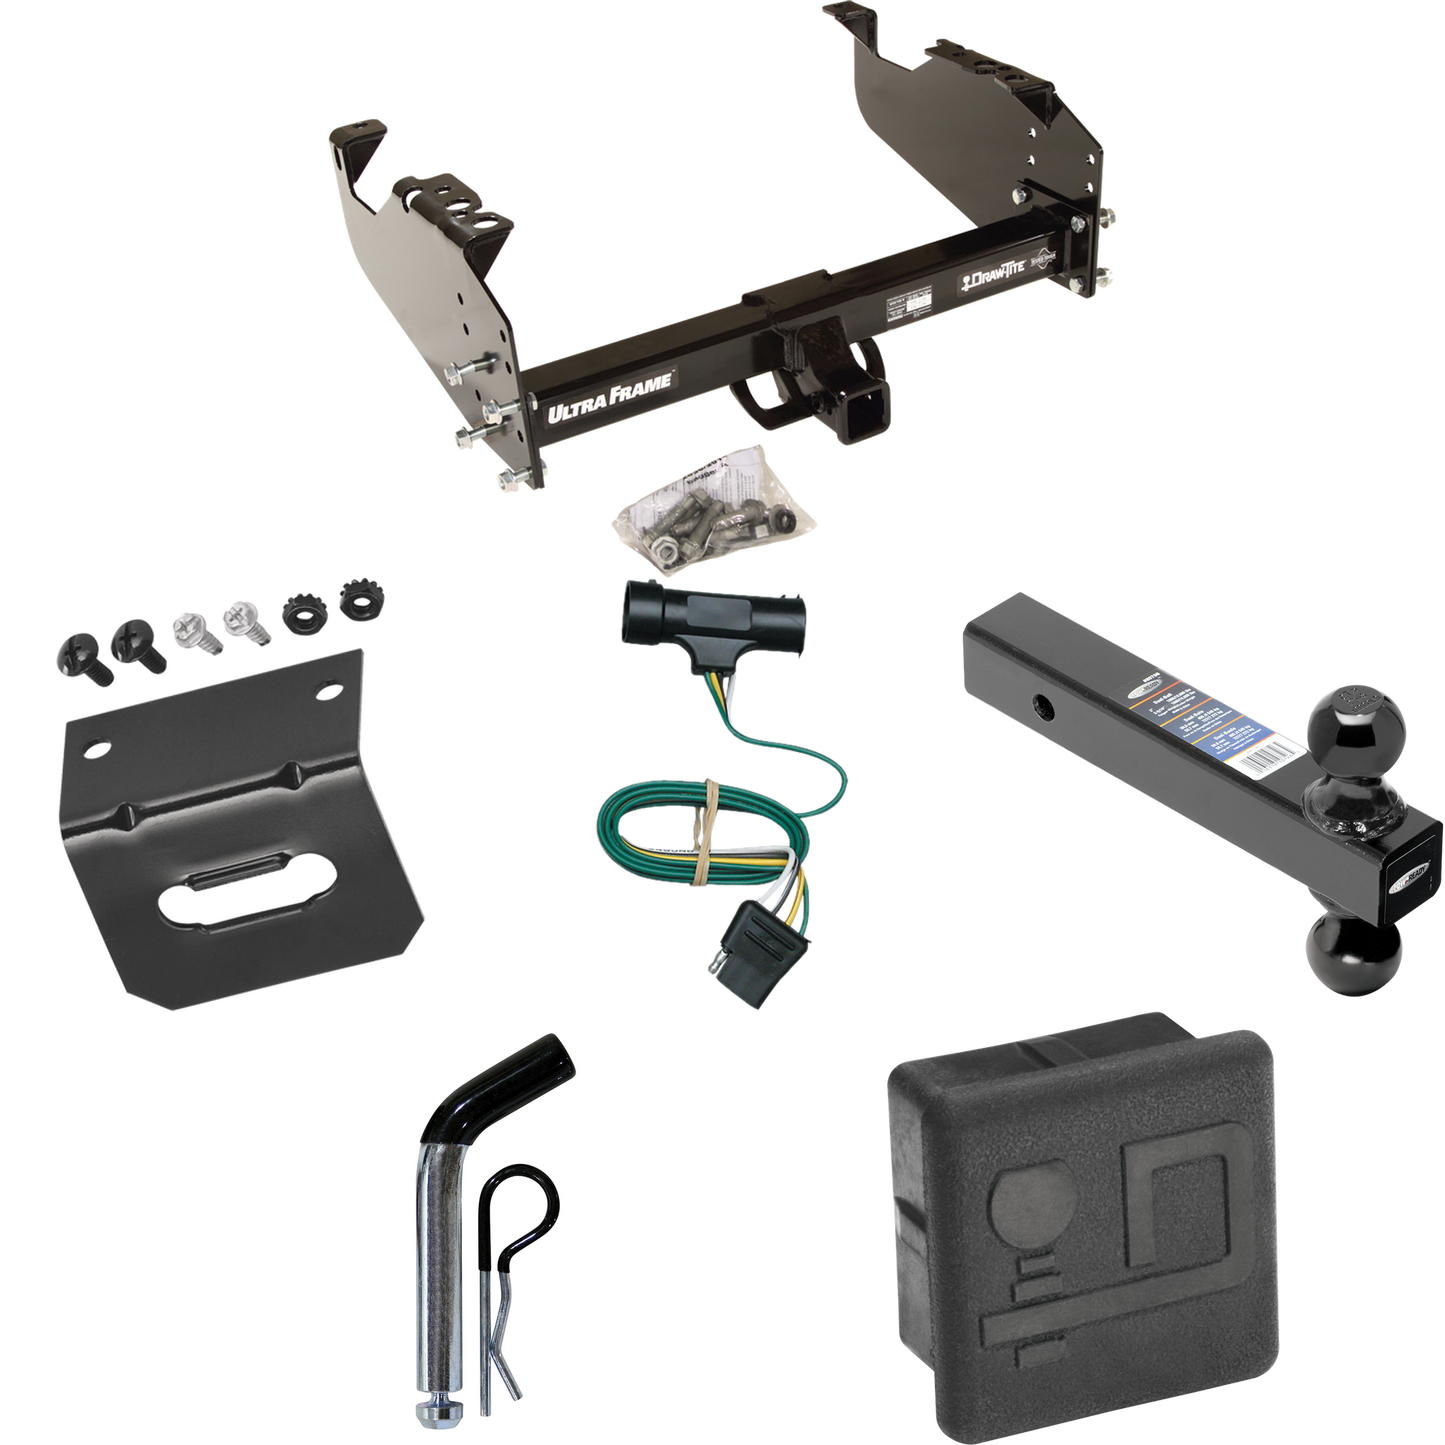 Fits 1973-1984 Chevrolet C20 Trailer Hitch Tow PKG w/ 4-Flat Wiring Harness + Dual Ball Ball Mount 2" & 2-5/16" Trailer Balls + Pin/Clip + Hitch Cover + Wiring Bracket By Draw-Tite